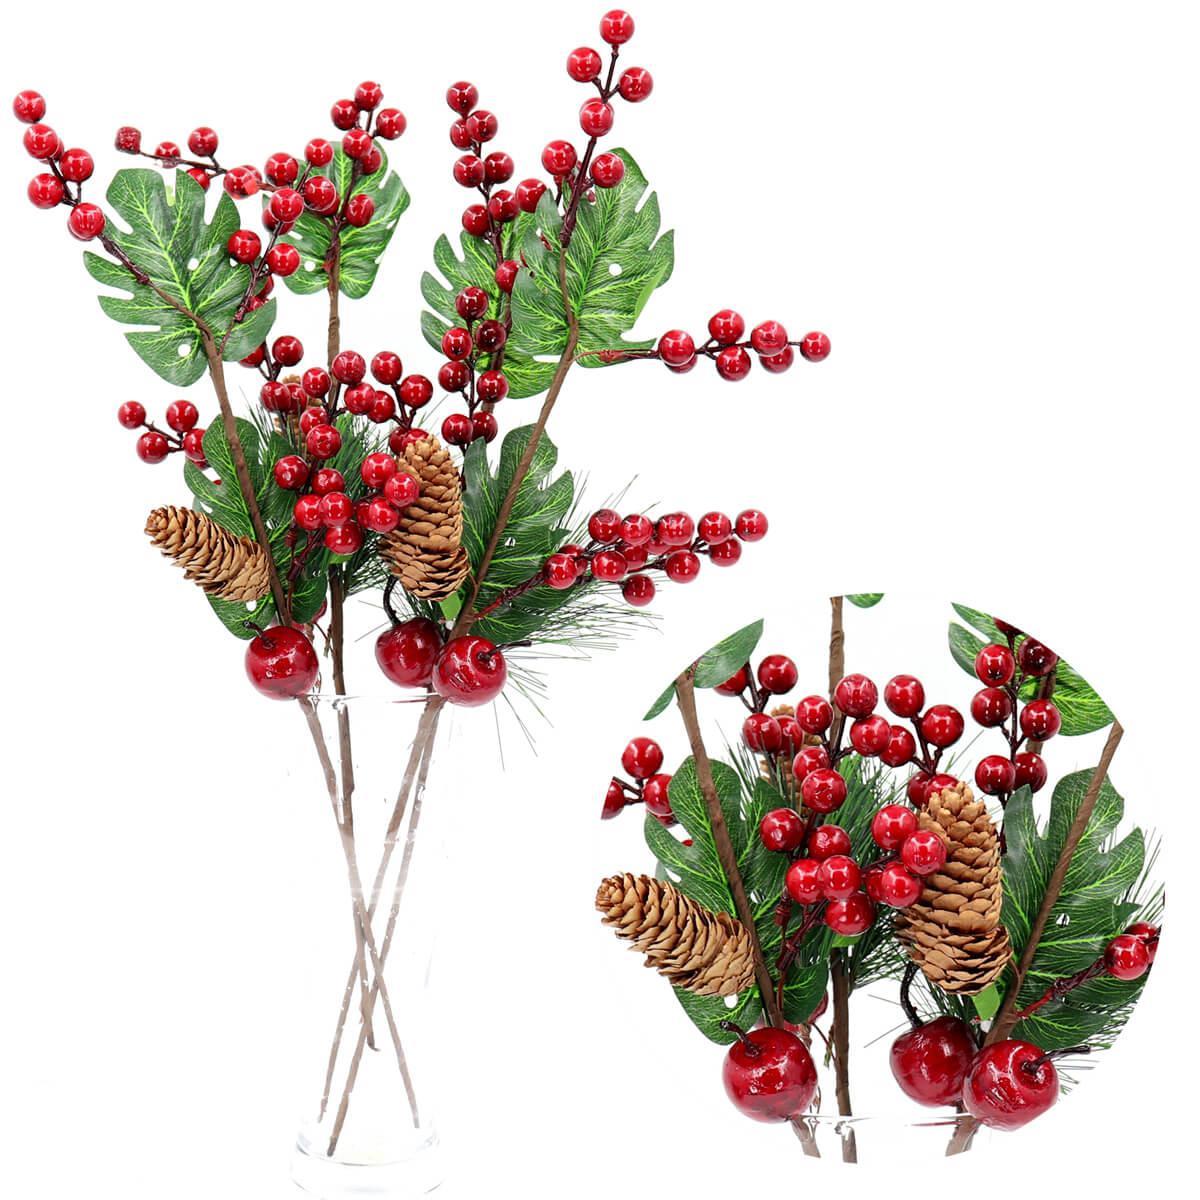 4x 50cm Christmas Artificial Flowers Berry Dewy Apple Pine Cones Leaves Branch